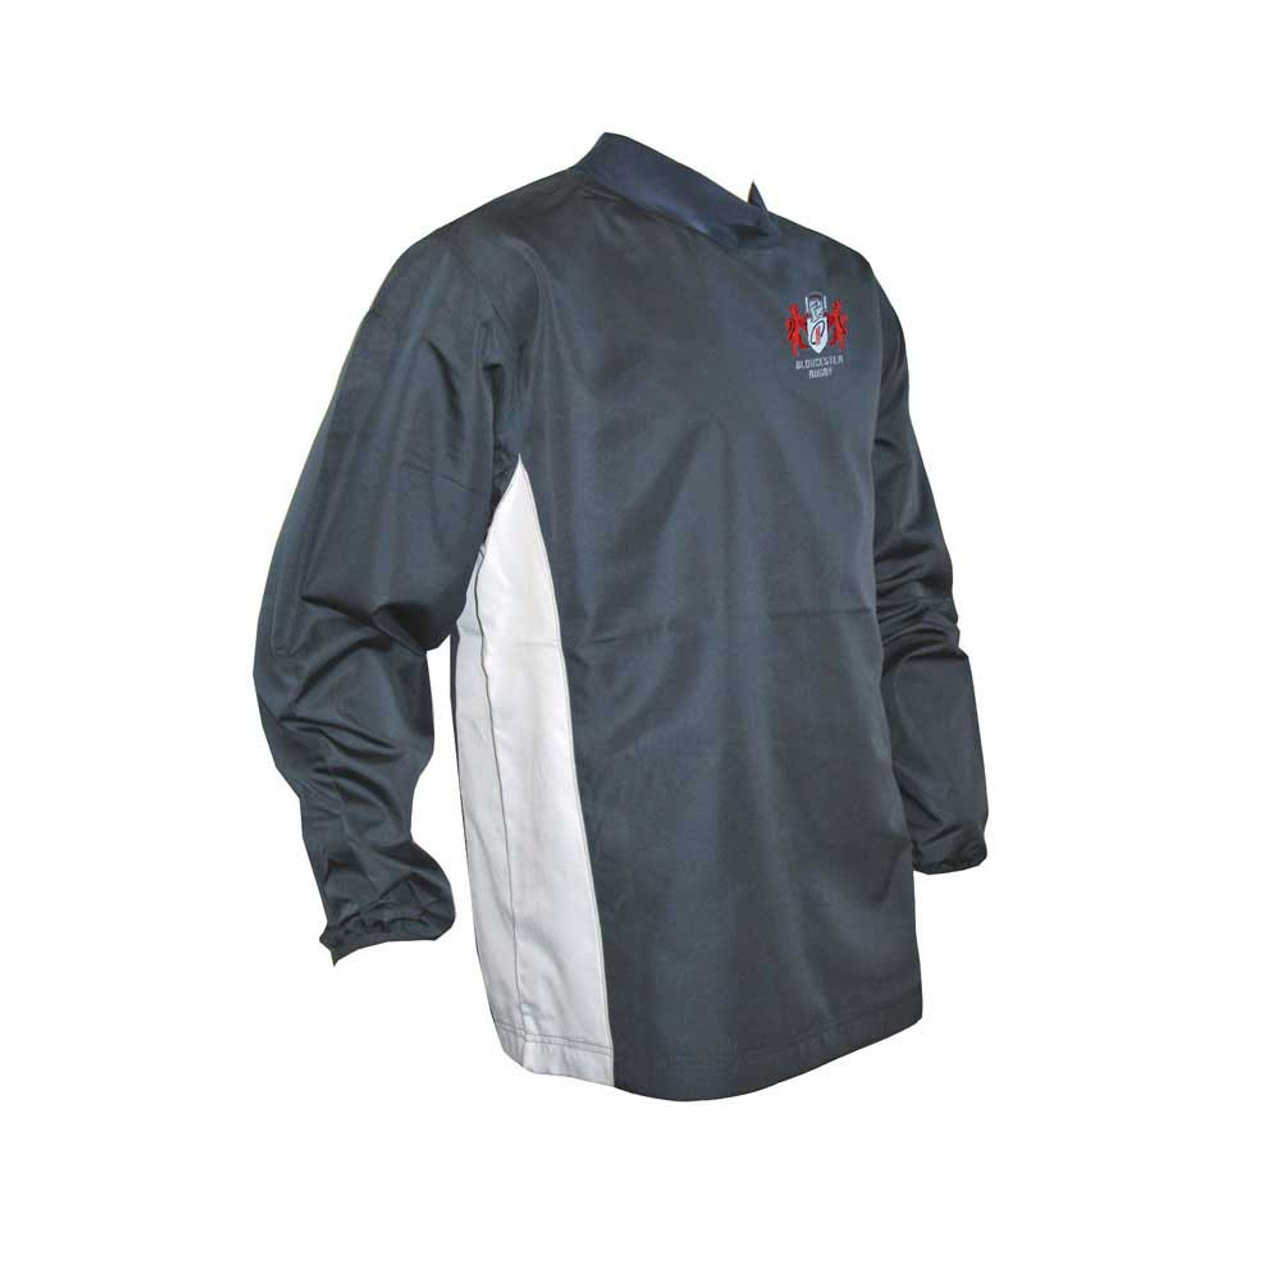 RUGBYTECH gloucester rugby all weather training top [navy/white]